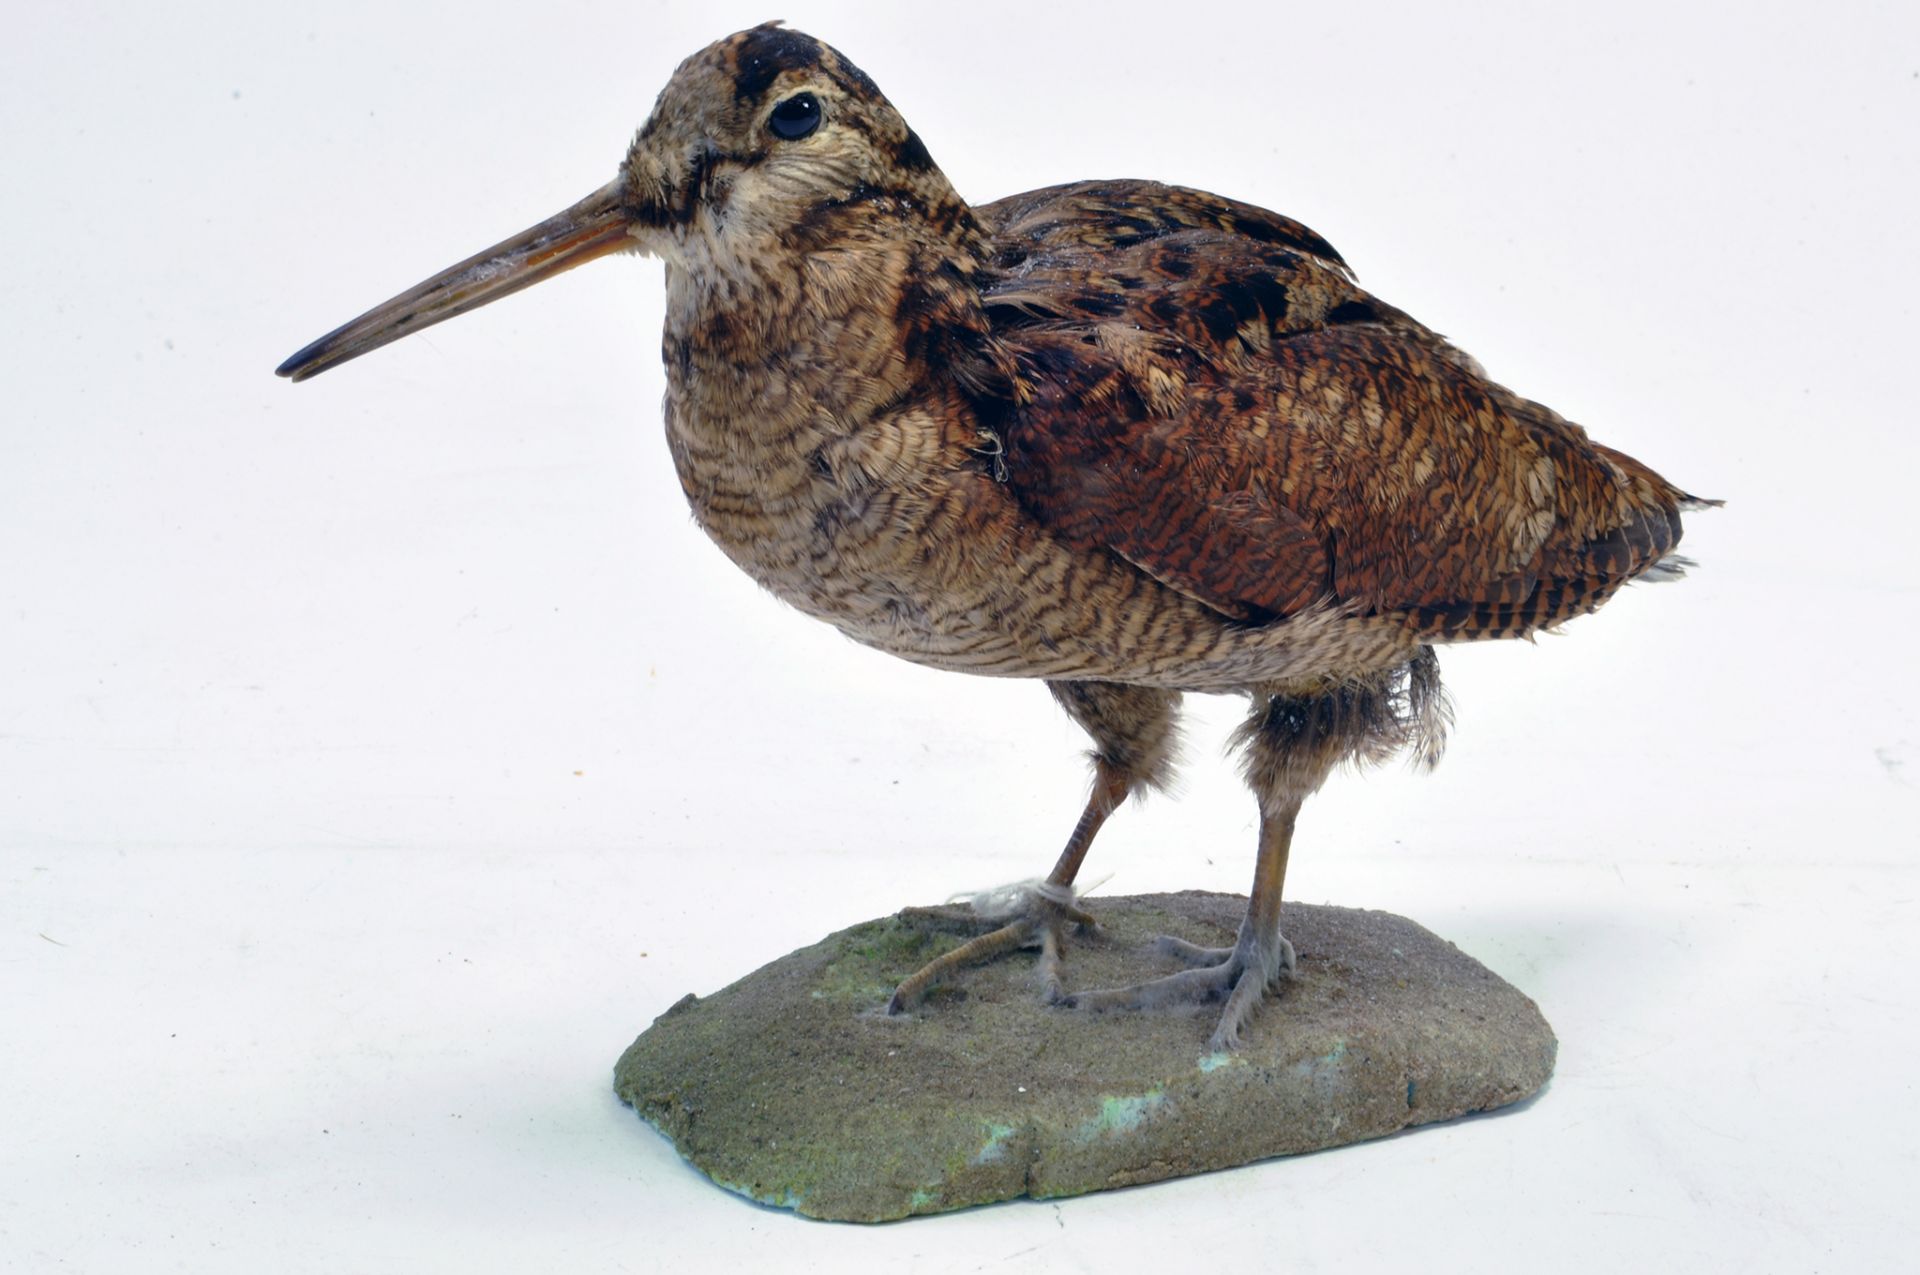 Taxidermy: An early 21st century example of a Woodcock (Scolopax rusticola), mounted on a Rock based